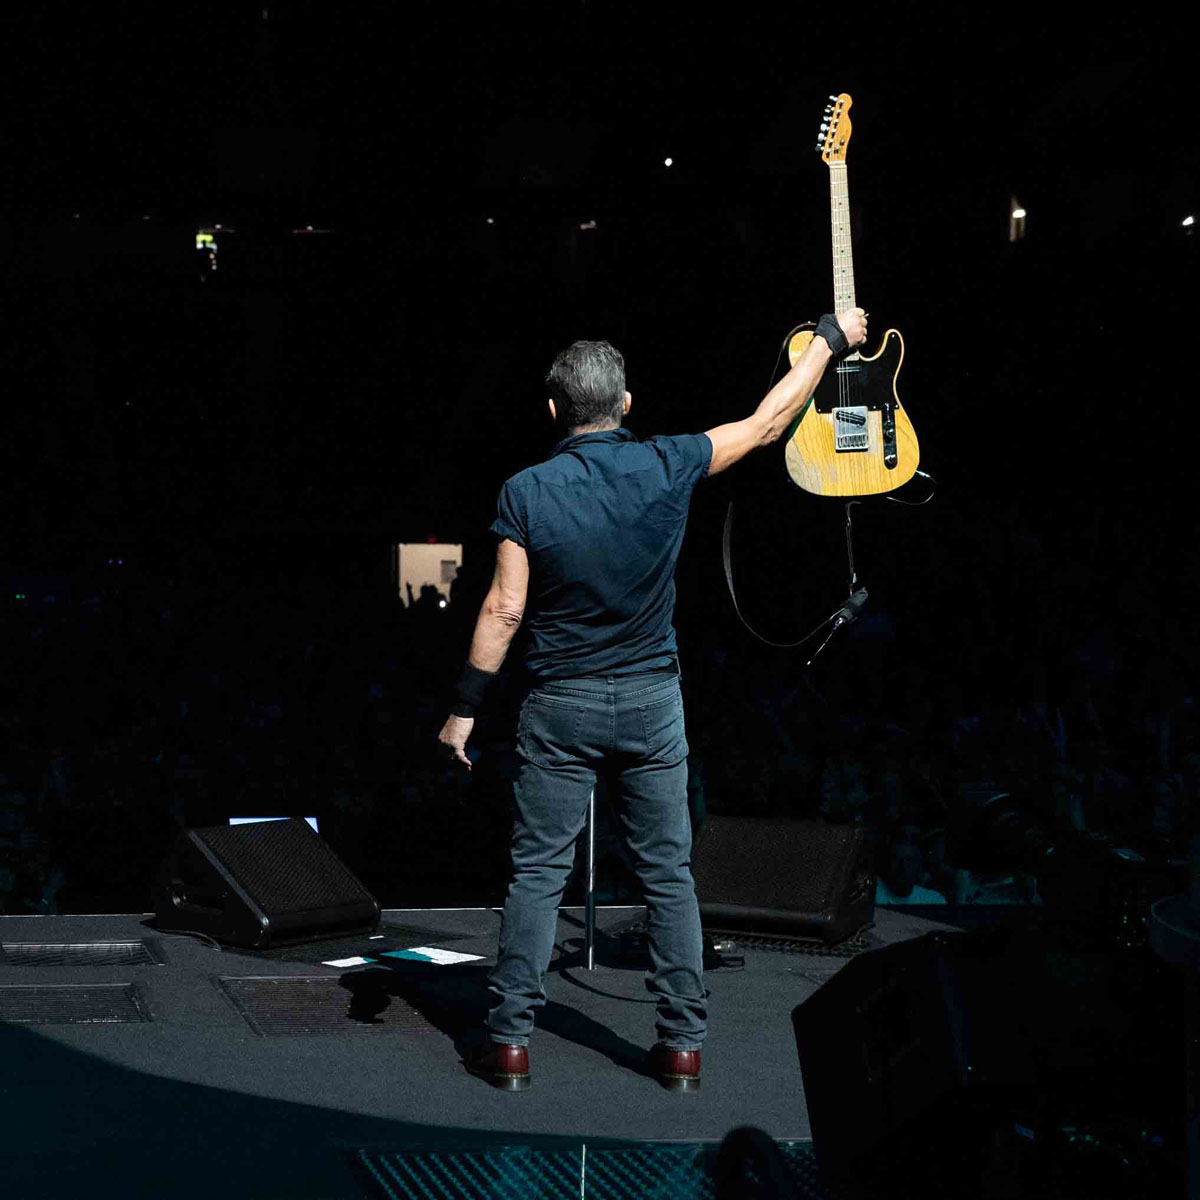 Bruce Springsteen & E Street Band at Bryce Jordan Center, State College, PA on March 18, 2023.